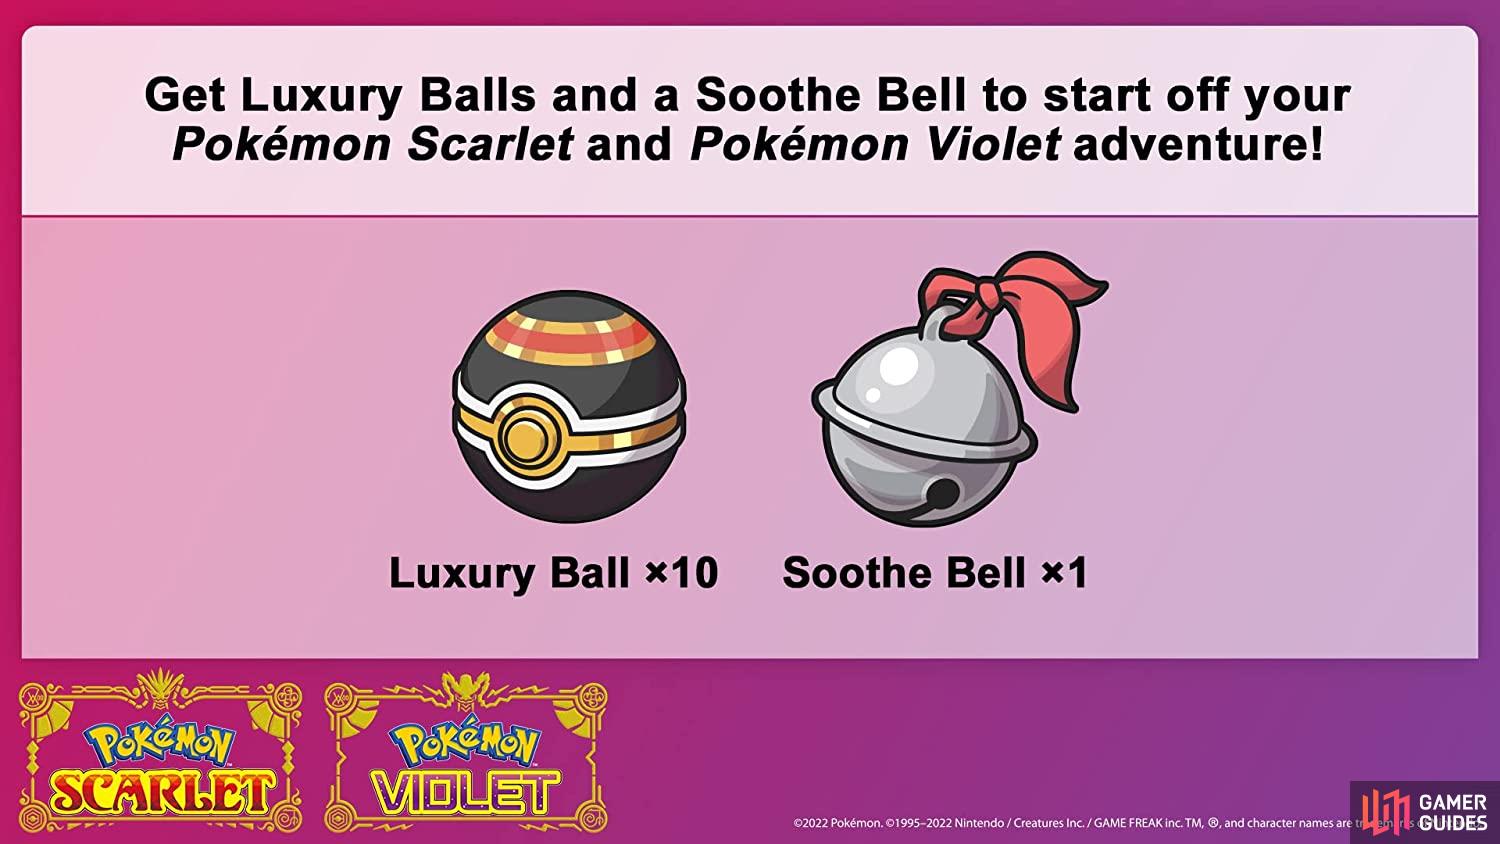 Luxury Balls and Soothe Bell. (Credit: The Pokémon Company)